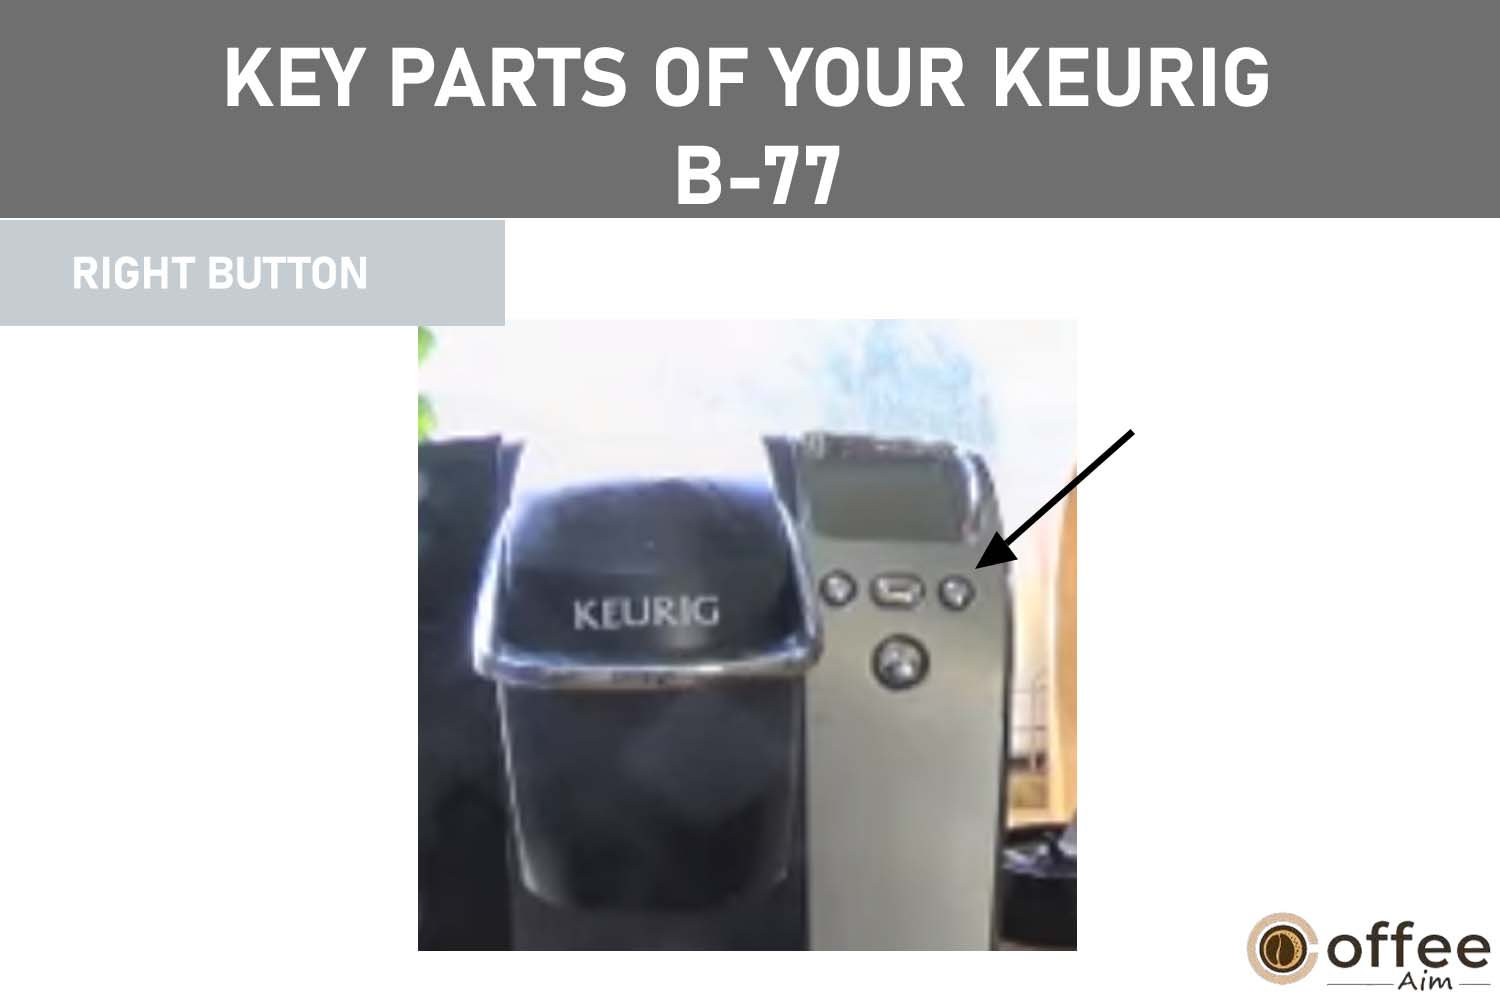 The Right button on the Keurig B-77 functions as a navigation control, enabling easy scrolling through menu options and adjusting settings with a single press on the display panel.